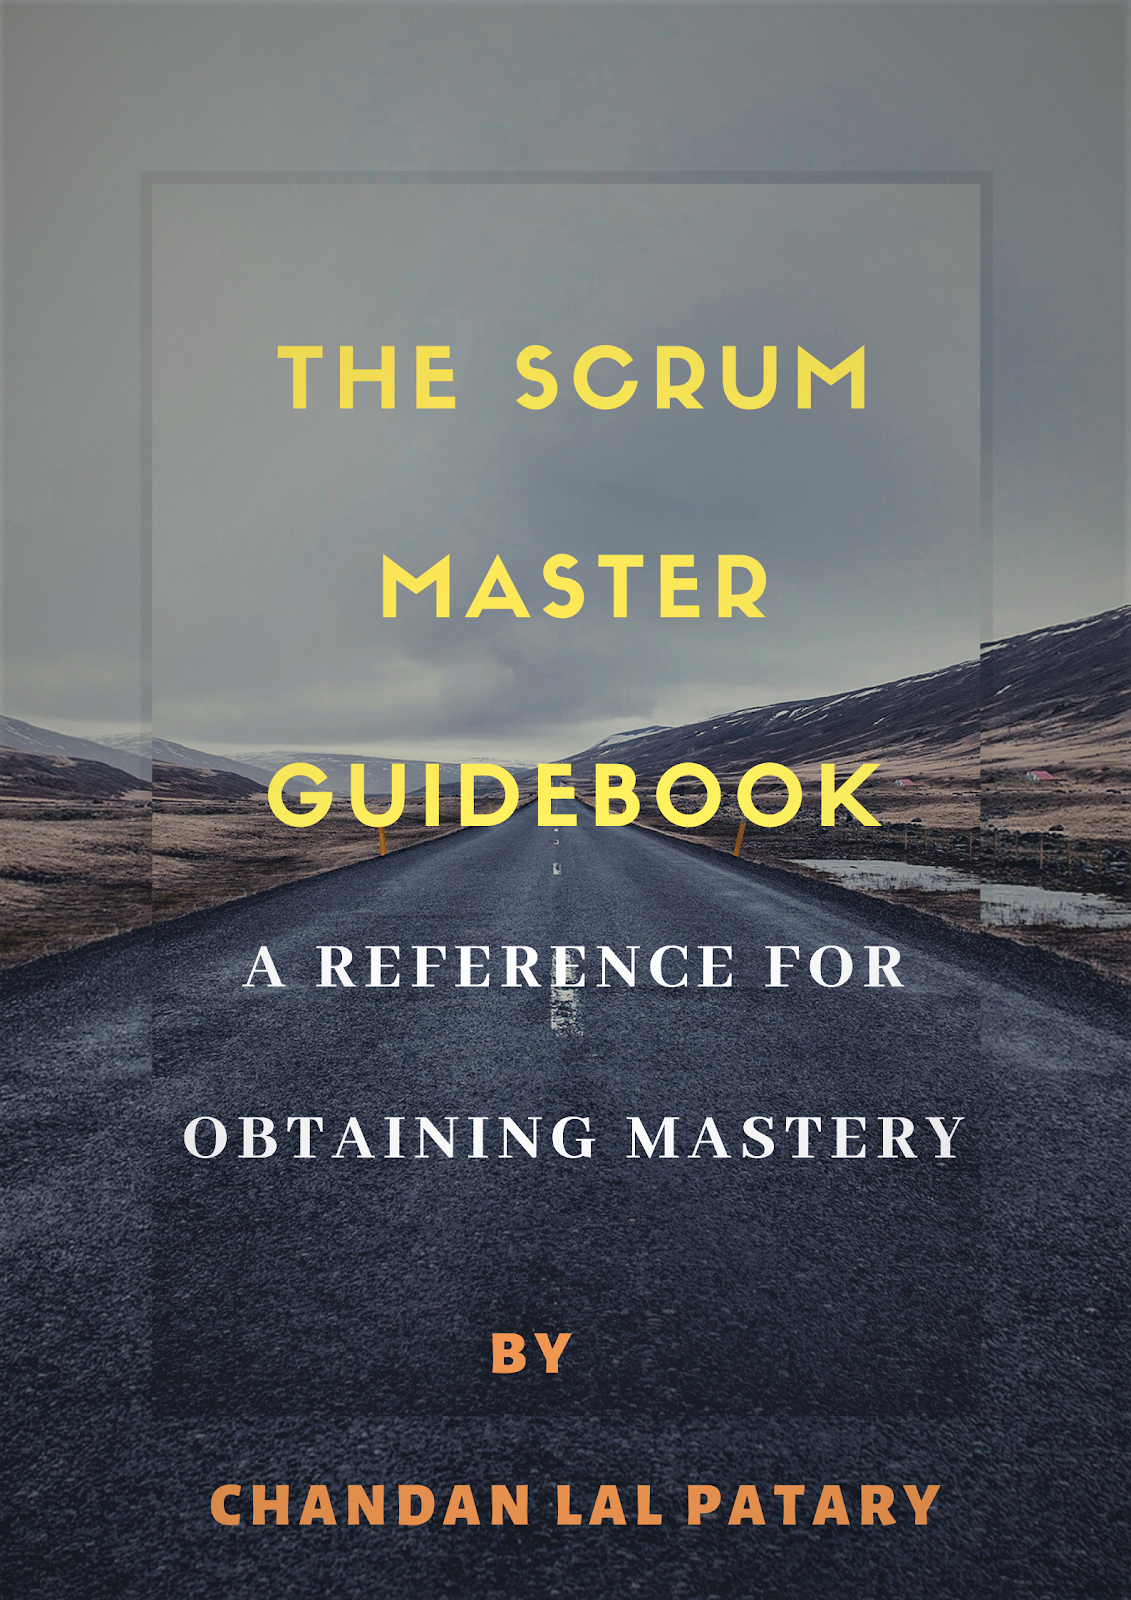 The Scrum Master Guidebook Chapters and Sub-chapters - Please have a look